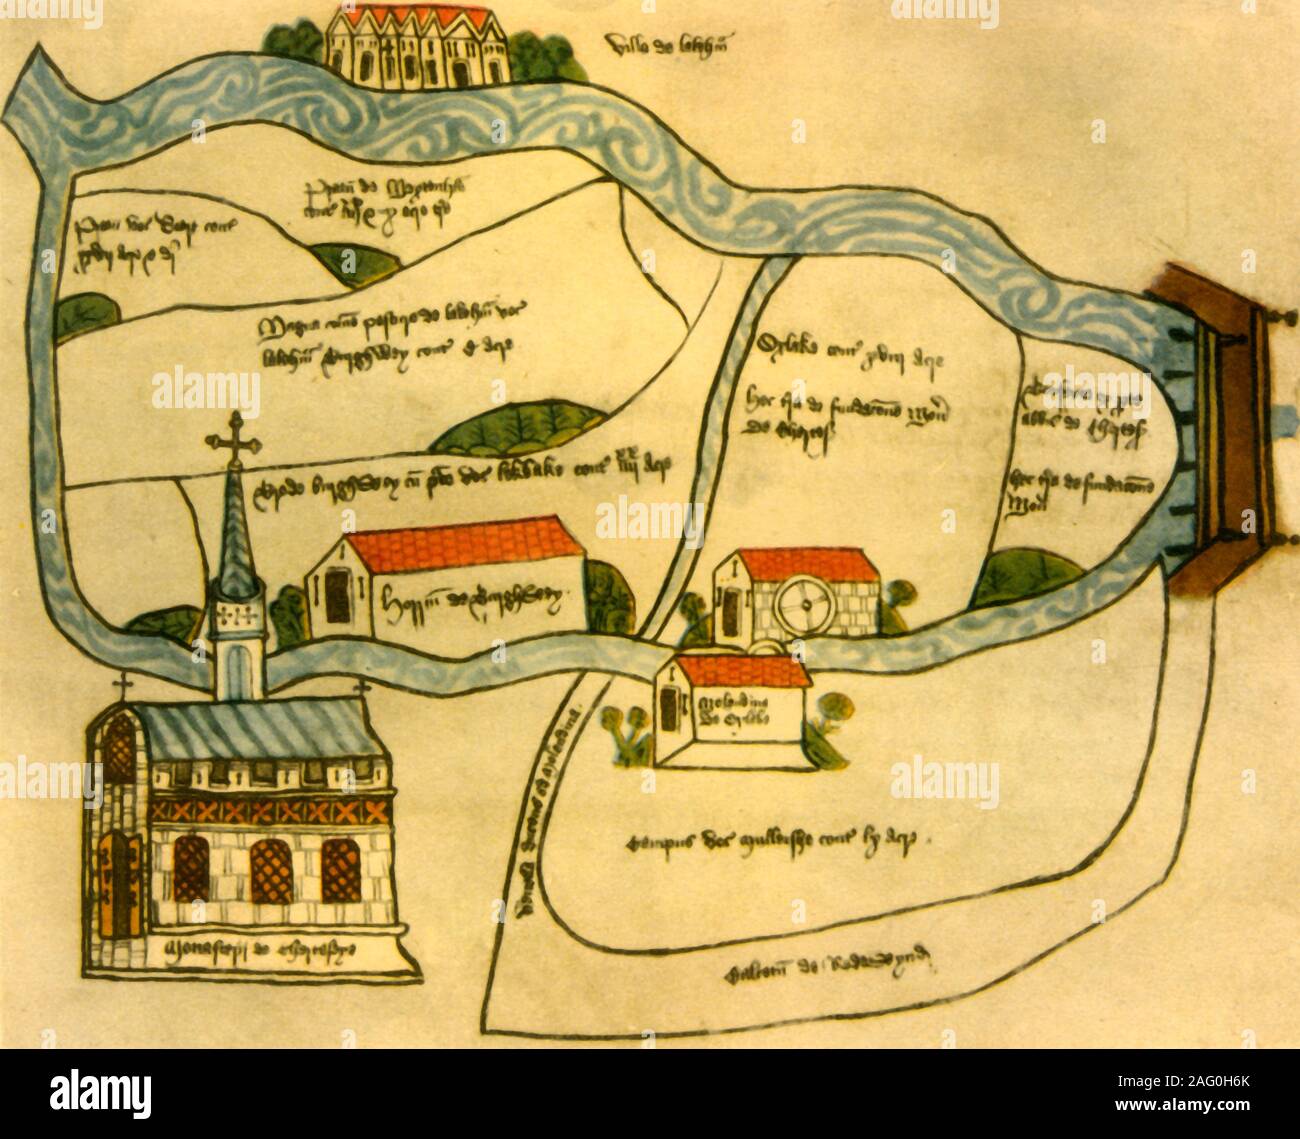 Map of Chertsey Abbey, 1432, (1944). Plan of Chertsey Abbey and estate in Surrey, showing the Benedictine monastery, Oxlake Mill, bridge over the river Thames, the village of Laleham, Burghwey Barn and Redewynd Causeway. Manuscript in the National Archives at Kew, London. From &quot;British Maps and Map-Makers&quot;, by Edward Lynam. [Collins, London, 1944] Stock Photo